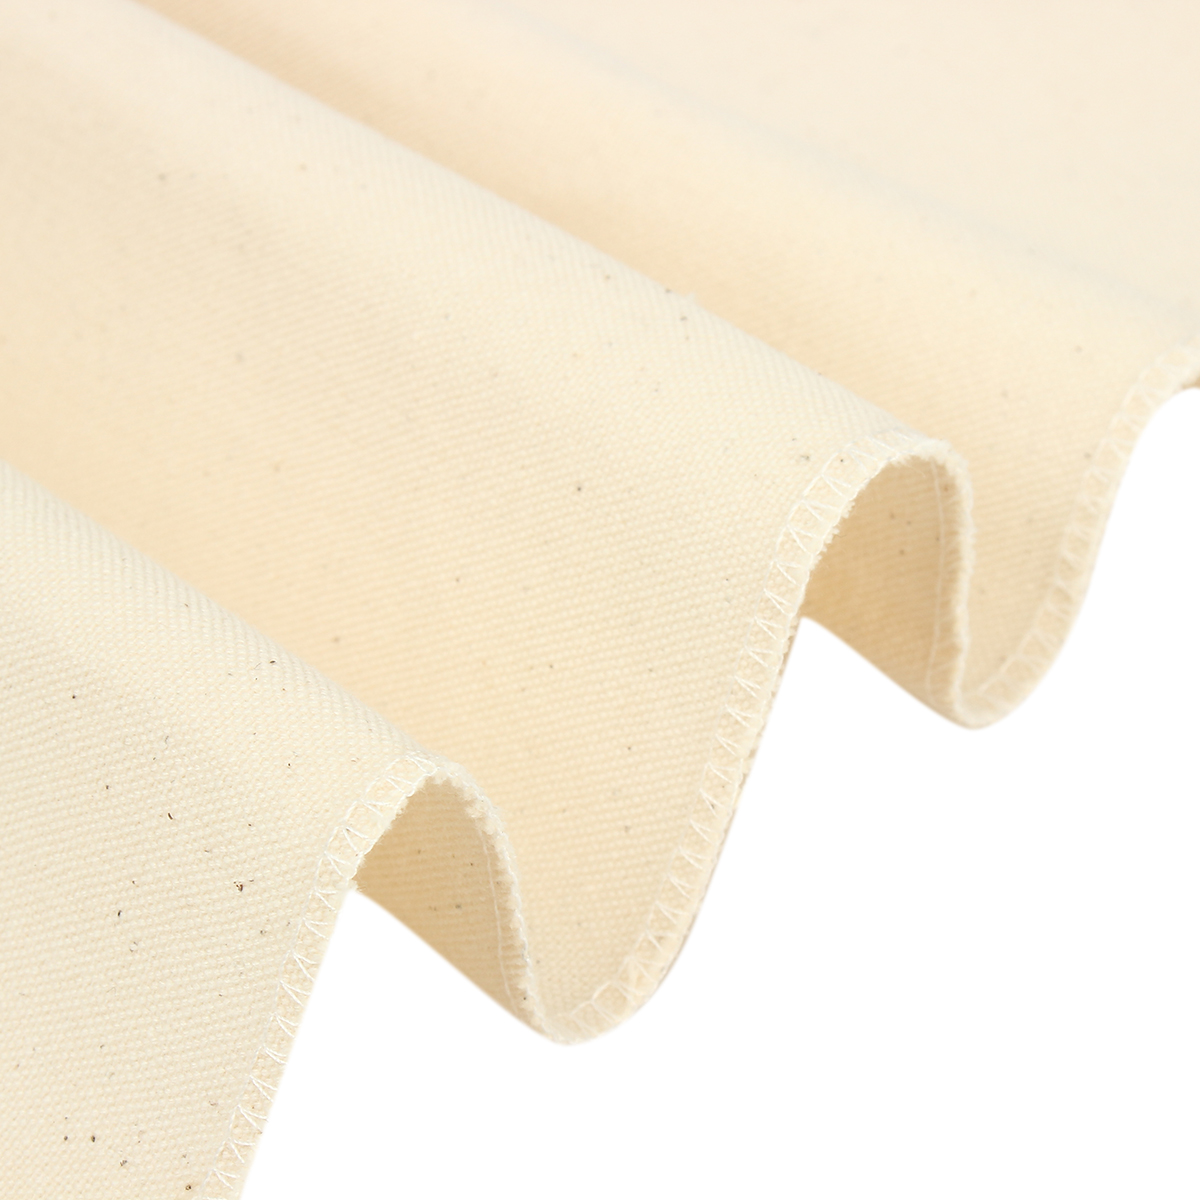 Flax-Liner-Cloth-Fiber-Cloth-Bakers-Proofing-Couche-for-Proving-Bread-Pans-Kitchen-Tool-Fermentation-1141080-6